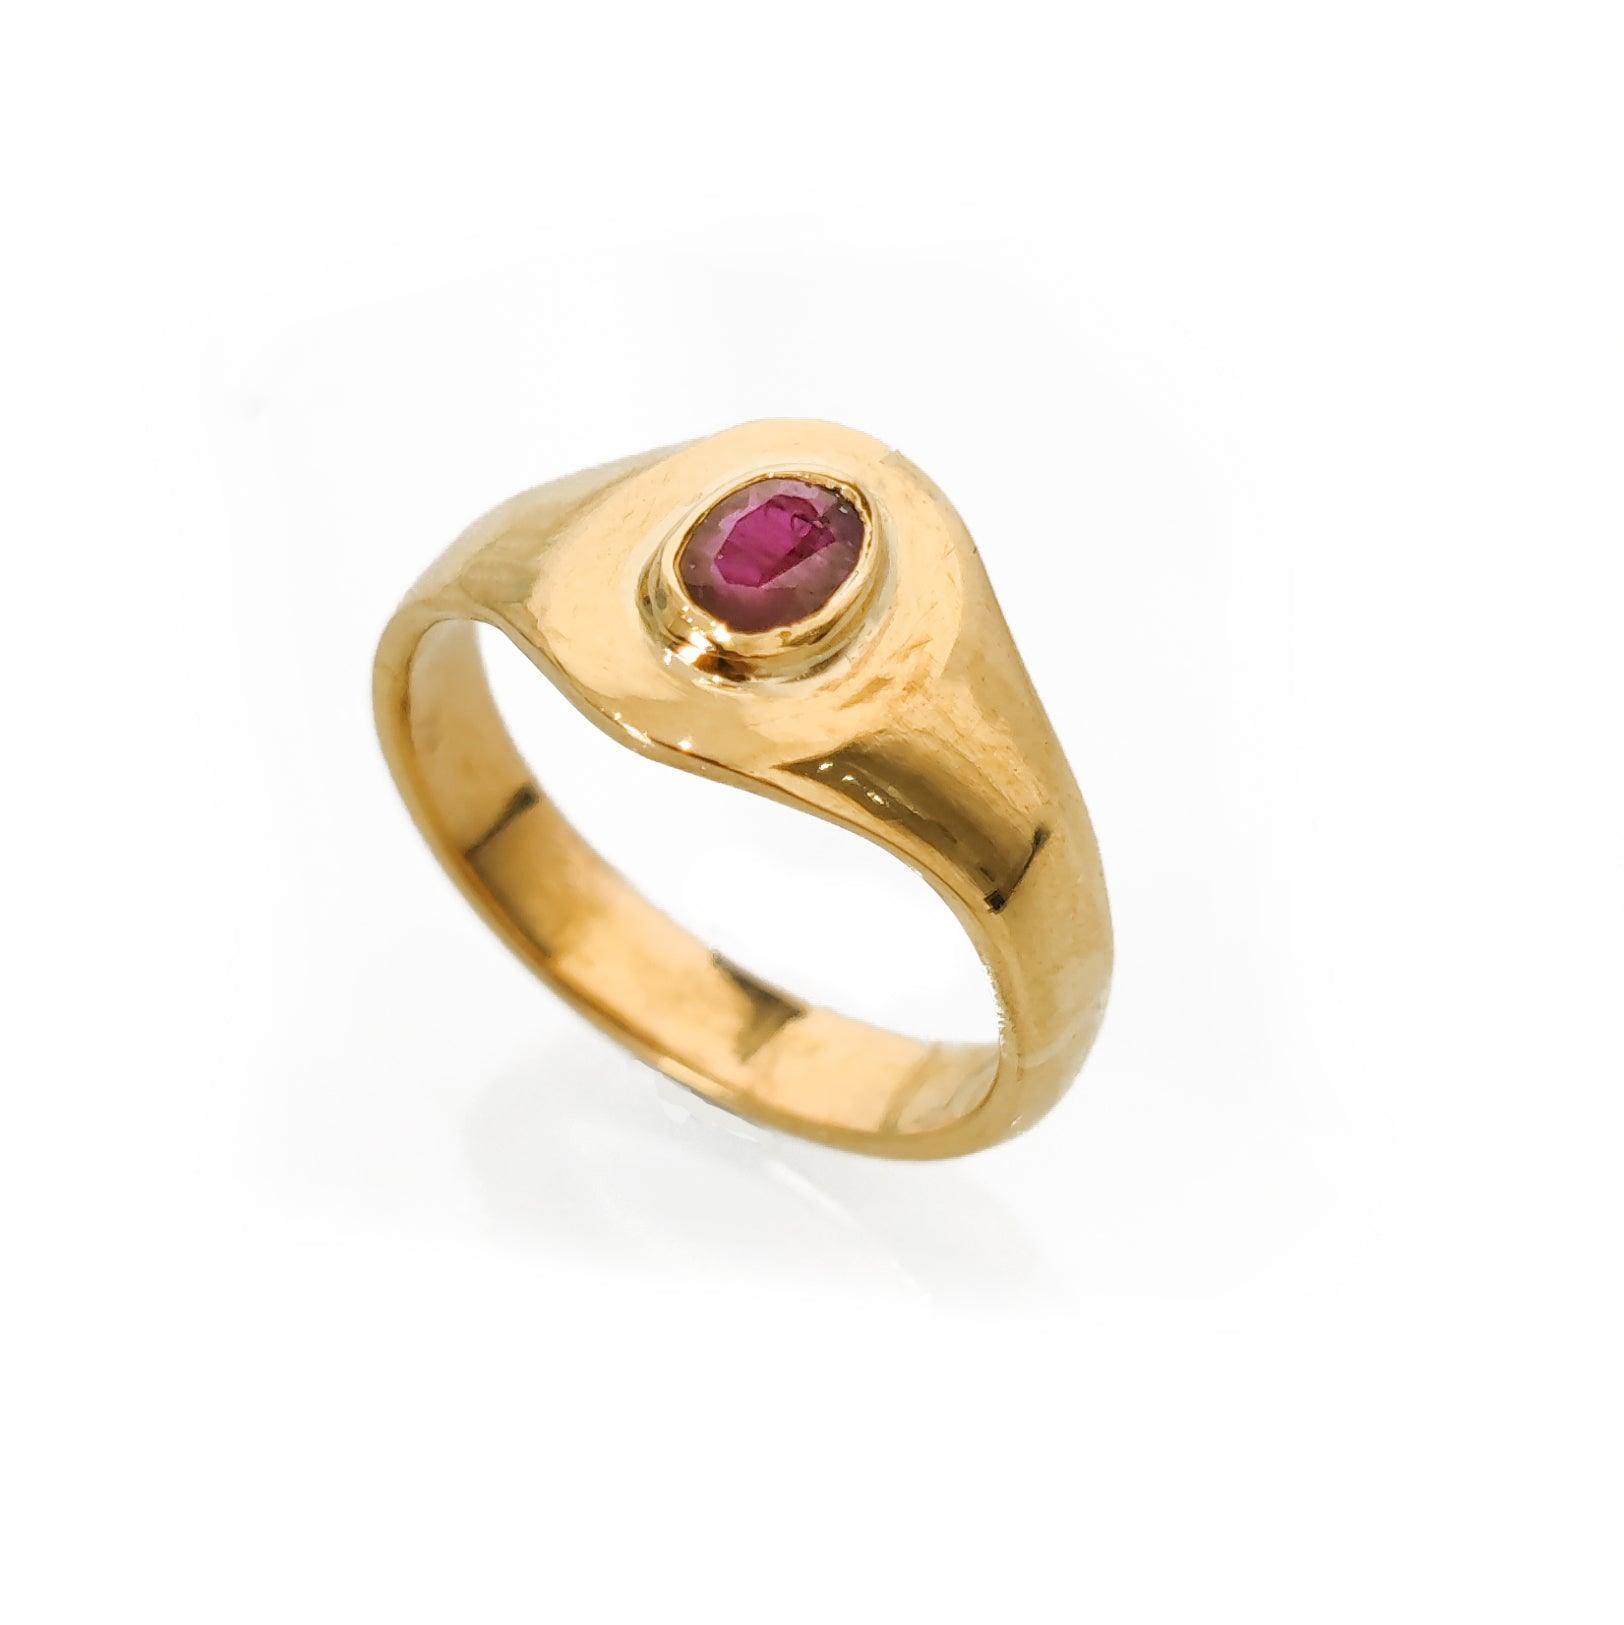 22ct Gold Ring set with Ruby LR-5868